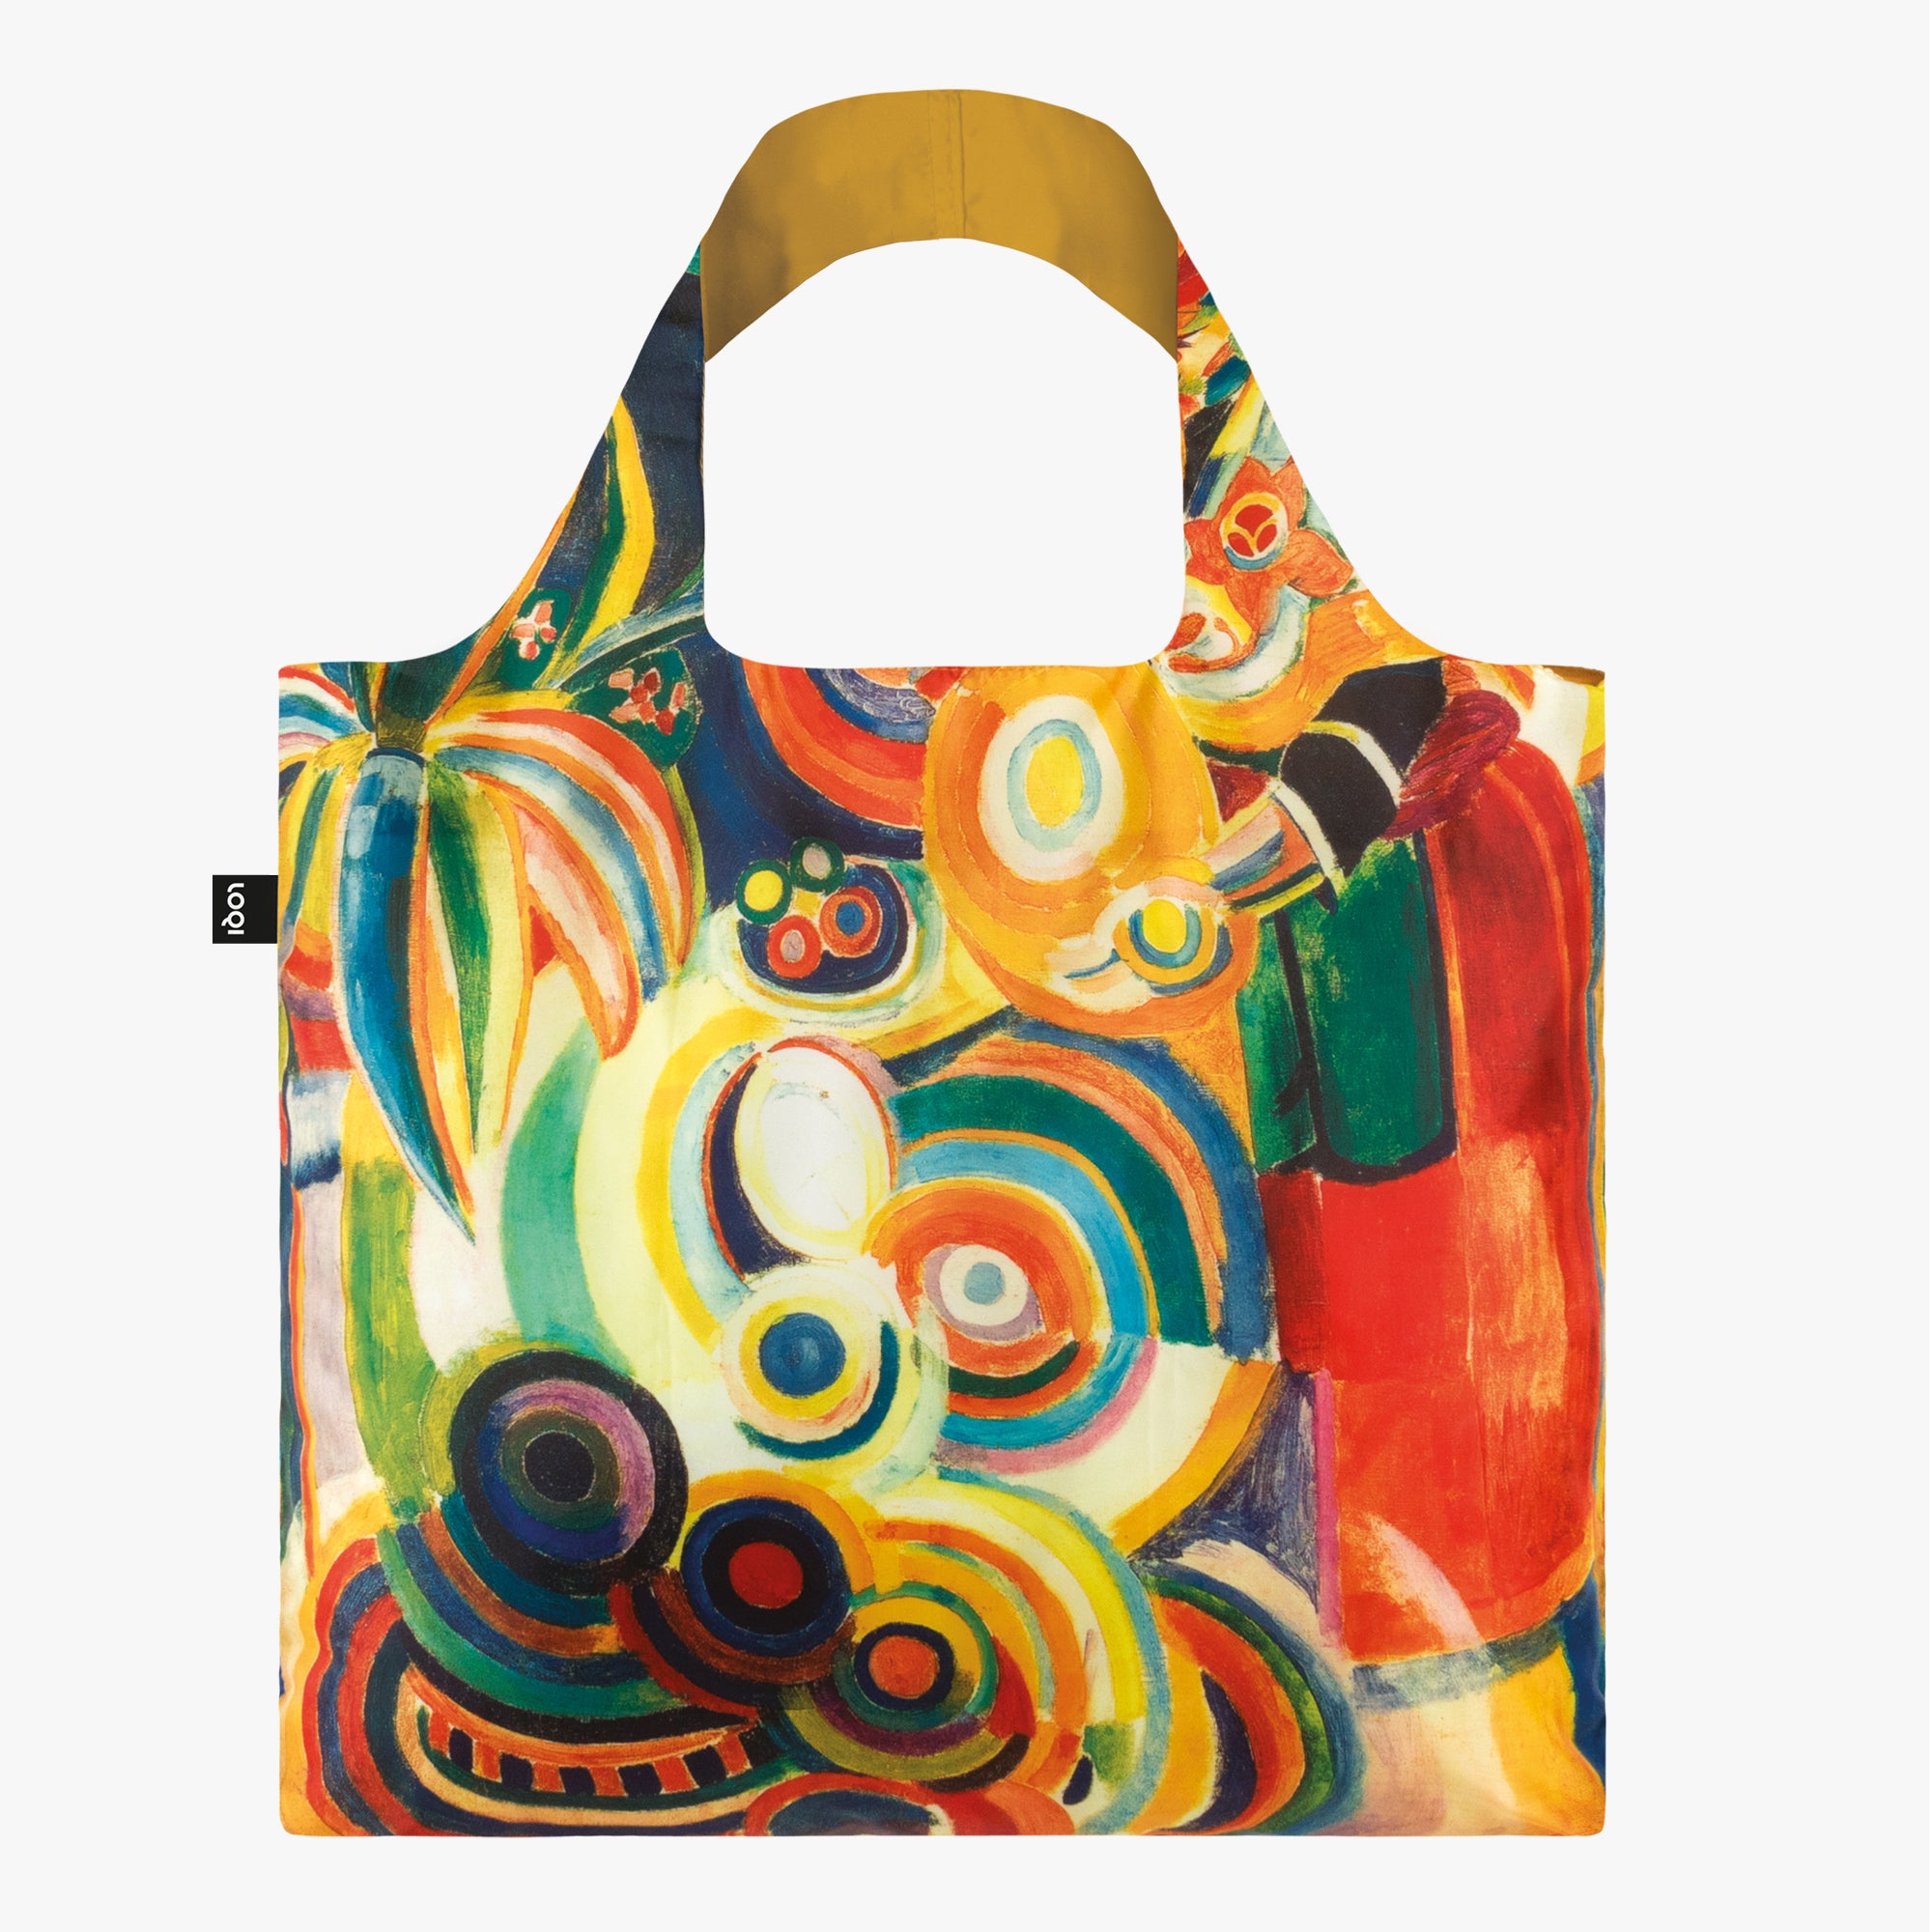 The Advantages Of Being A Woman Artist Recycled Bag - LOQI GmbH